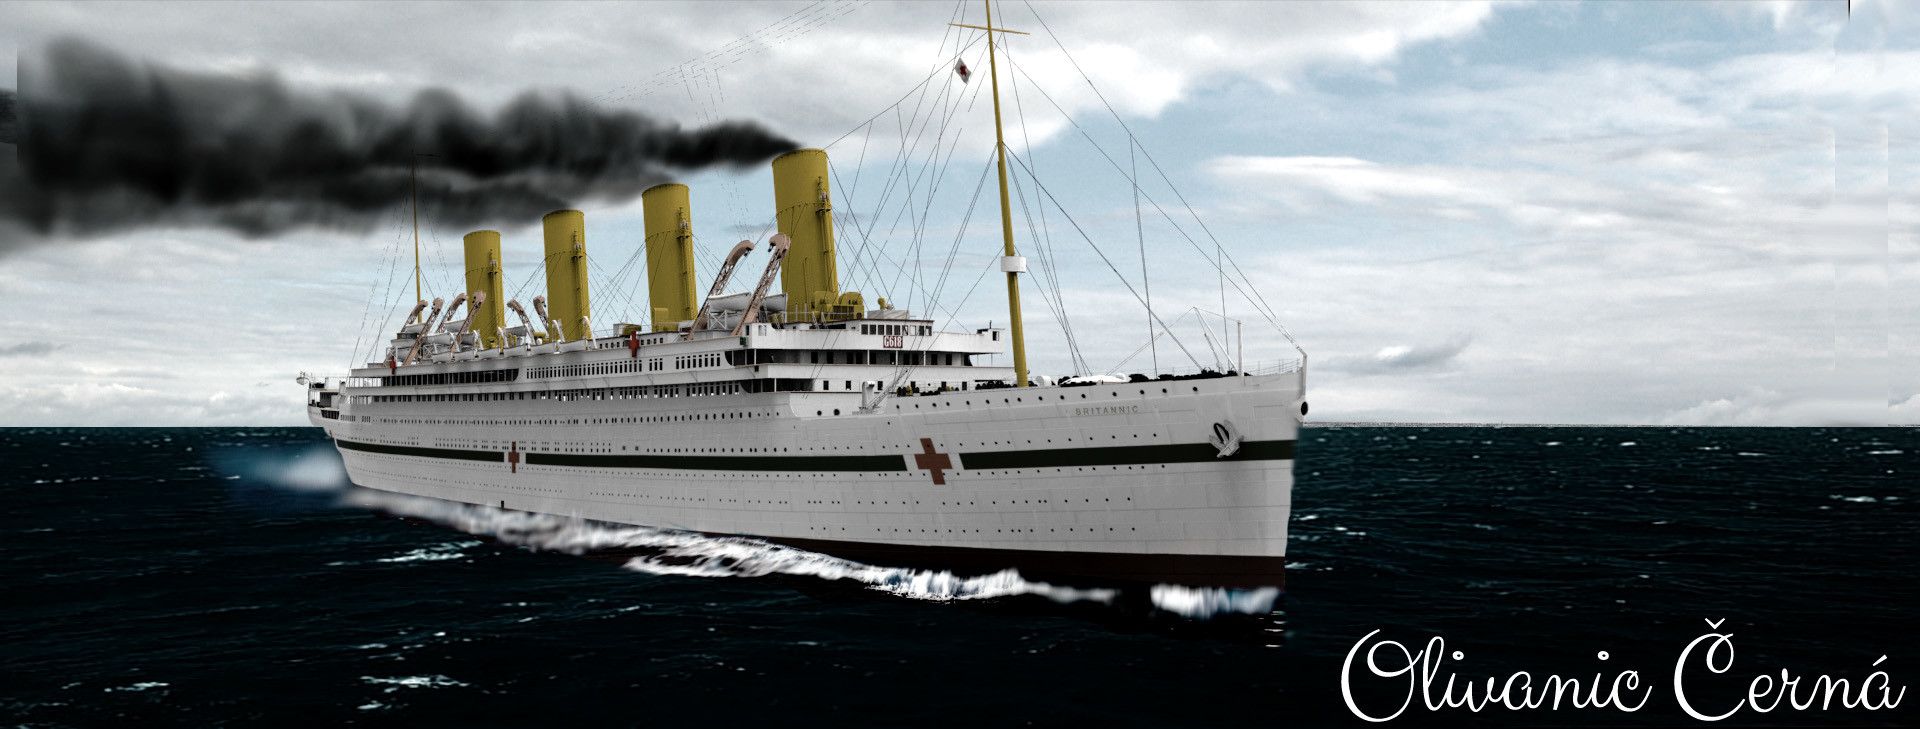 old Olympic Class Liners Renderings, Mike Woods